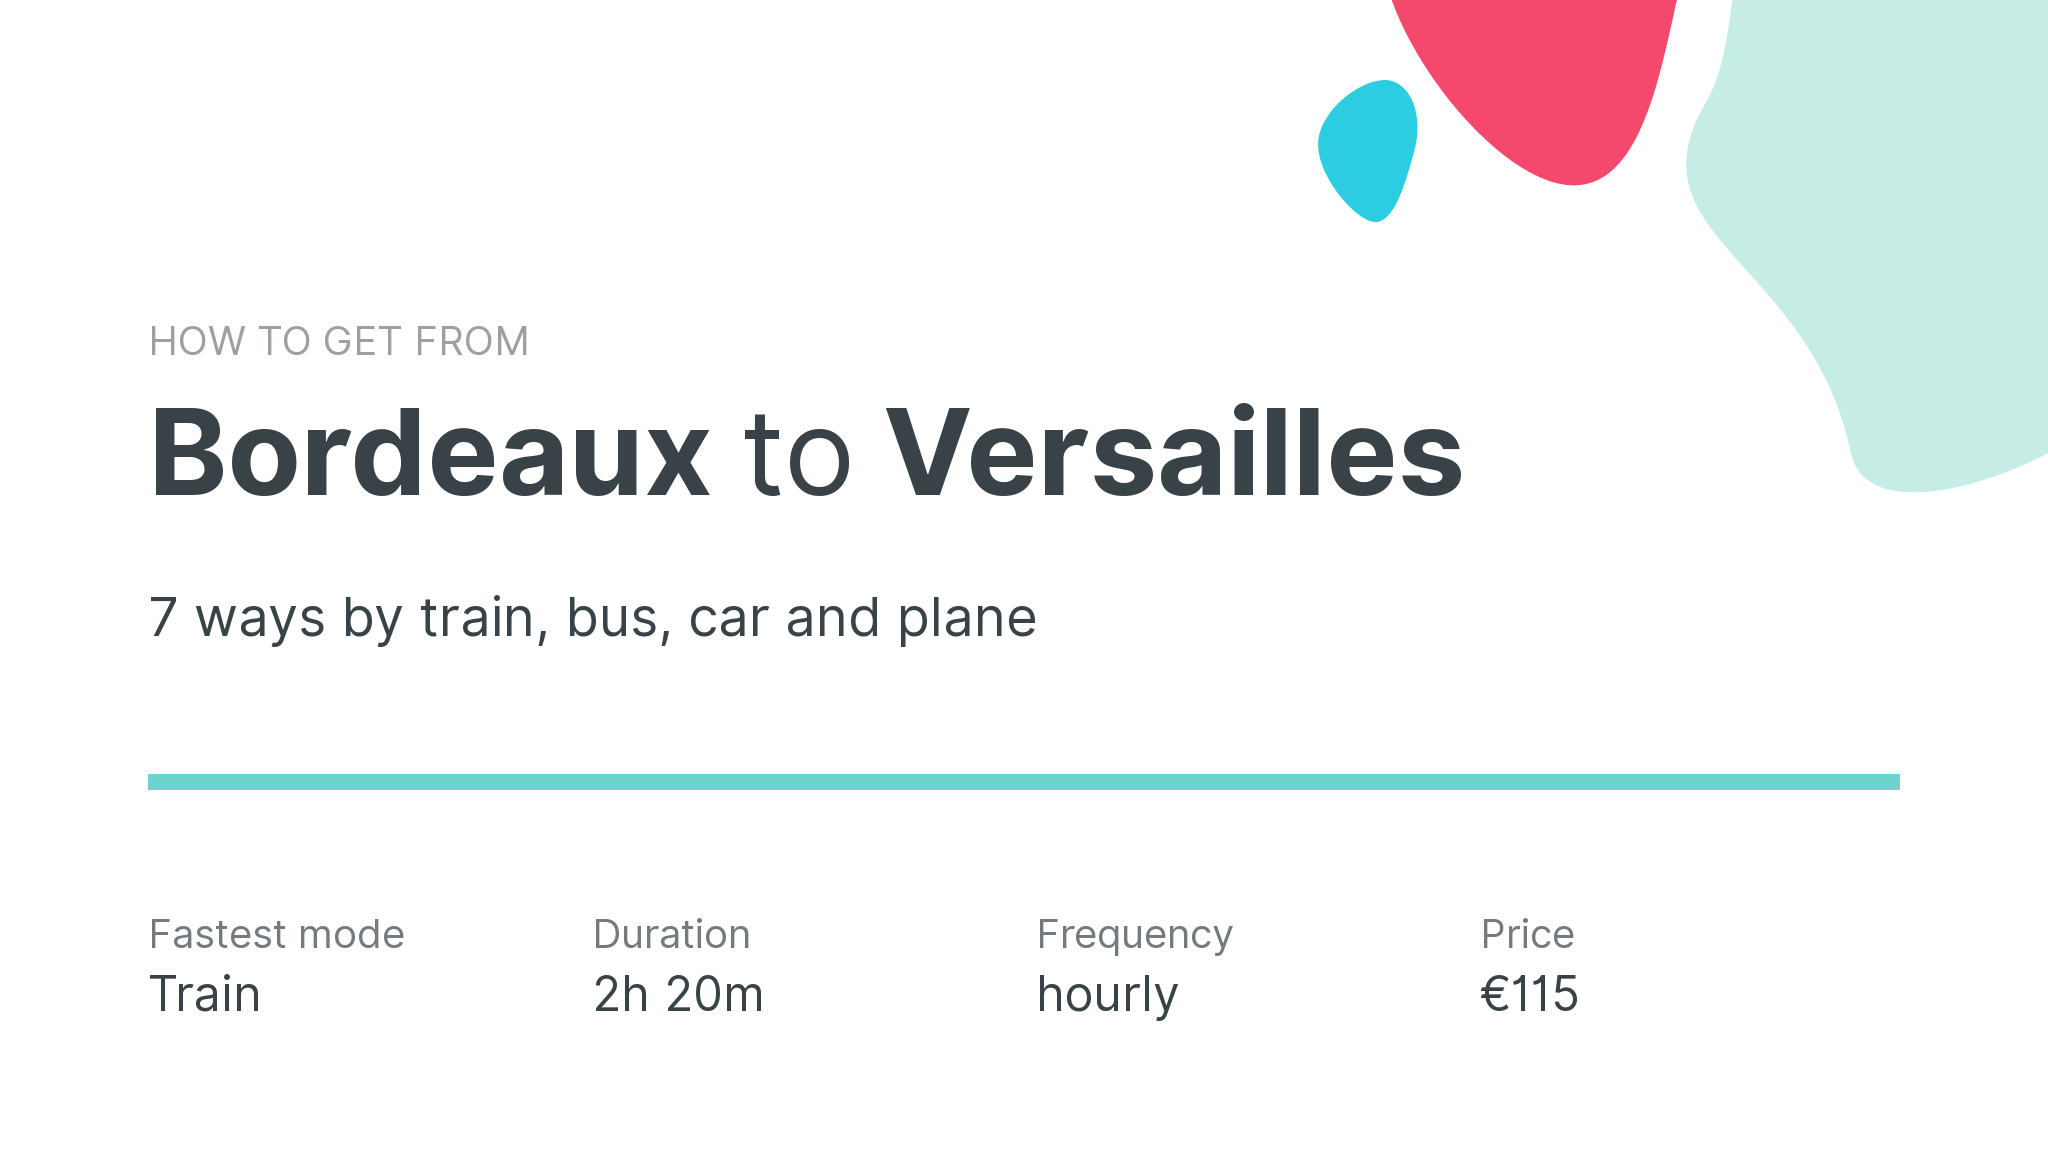 How do I get from Bordeaux to Versailles